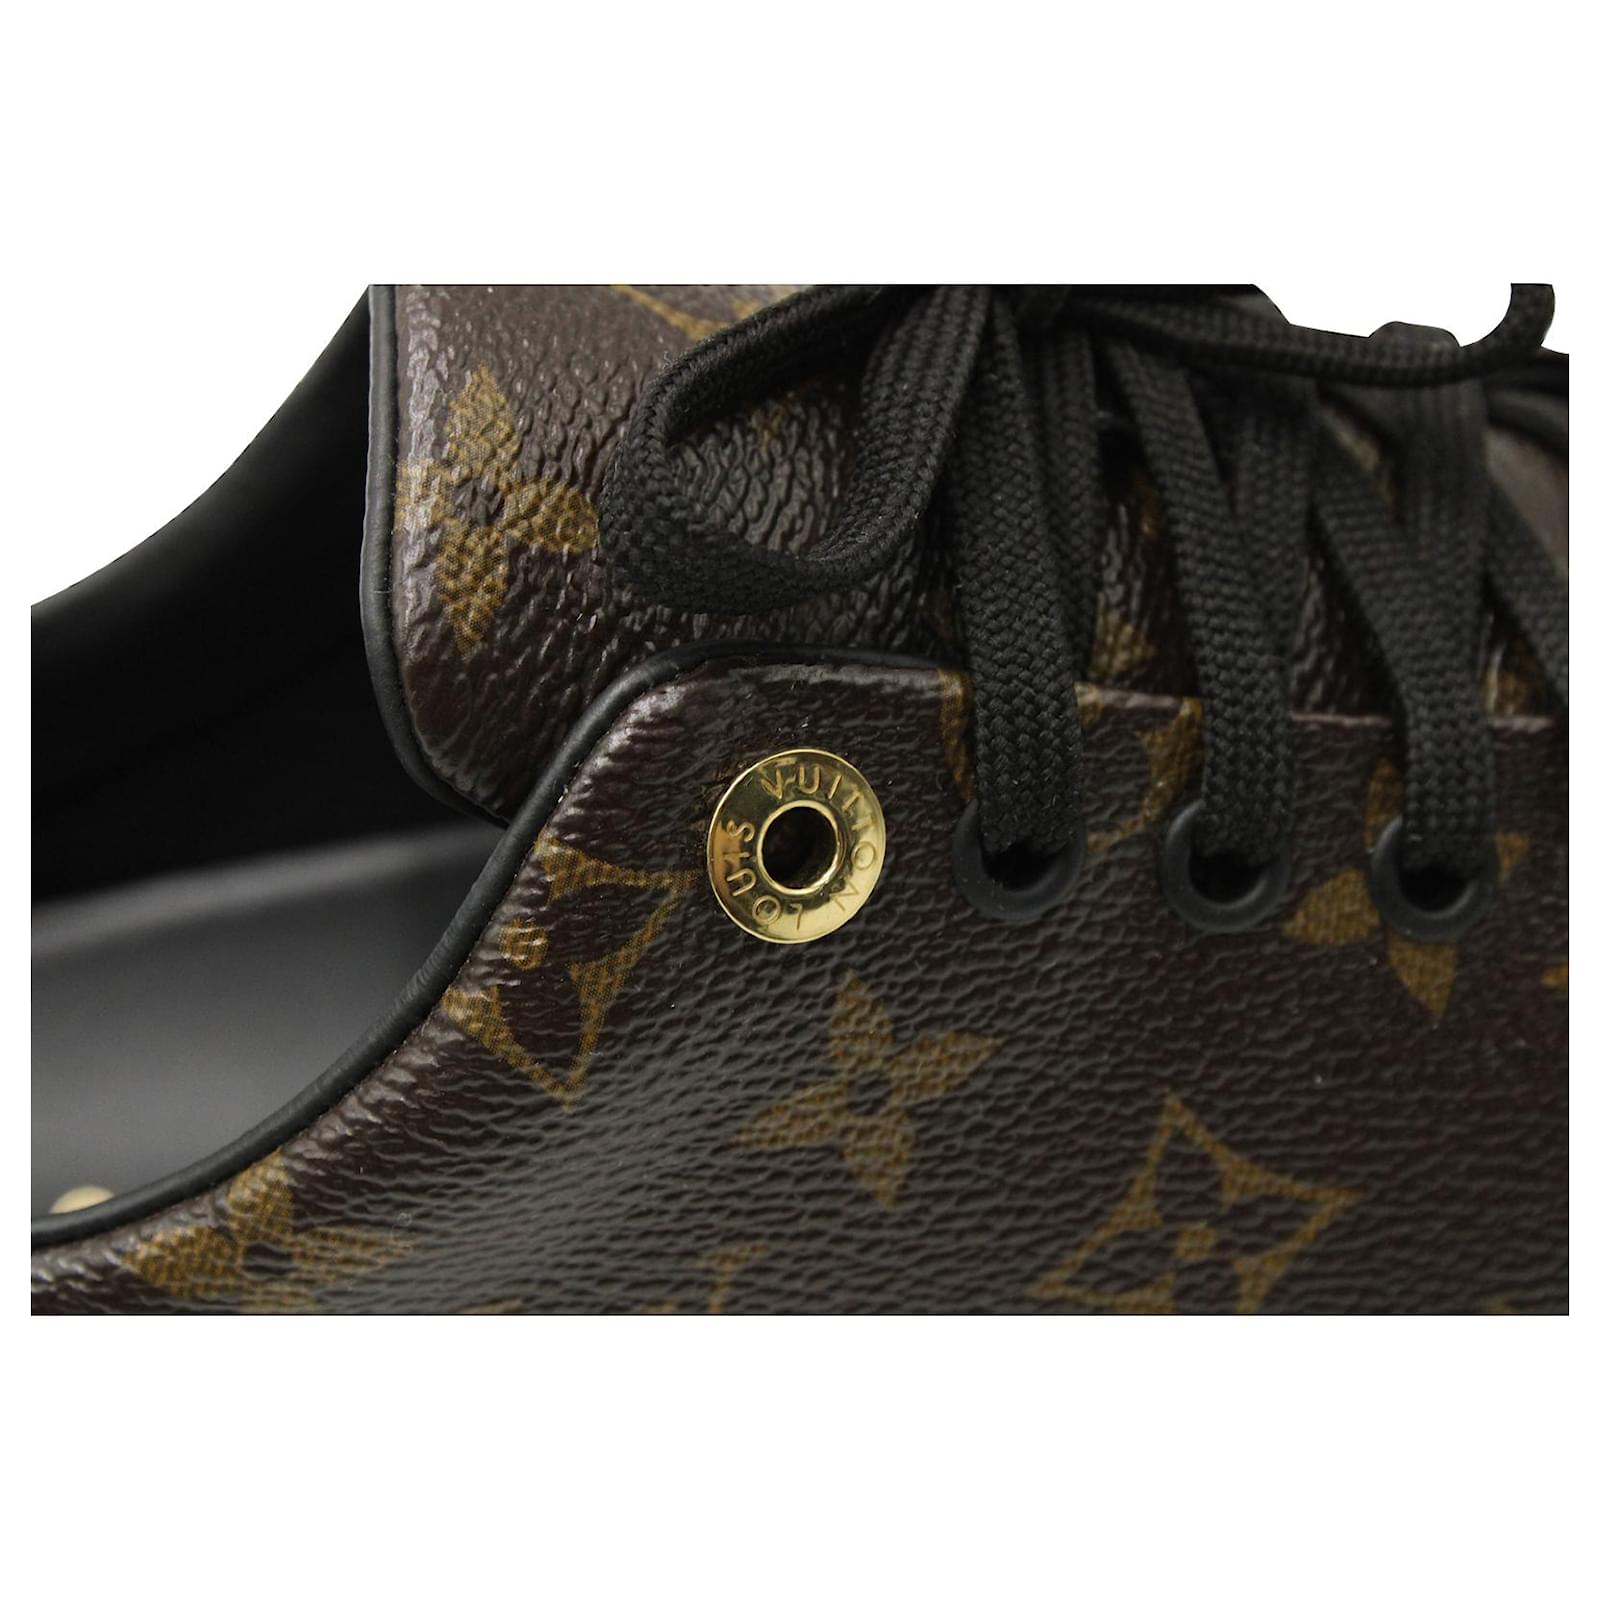 Louis Vuitton Brown Monogram Canvas and Black Patent Frontrow Low